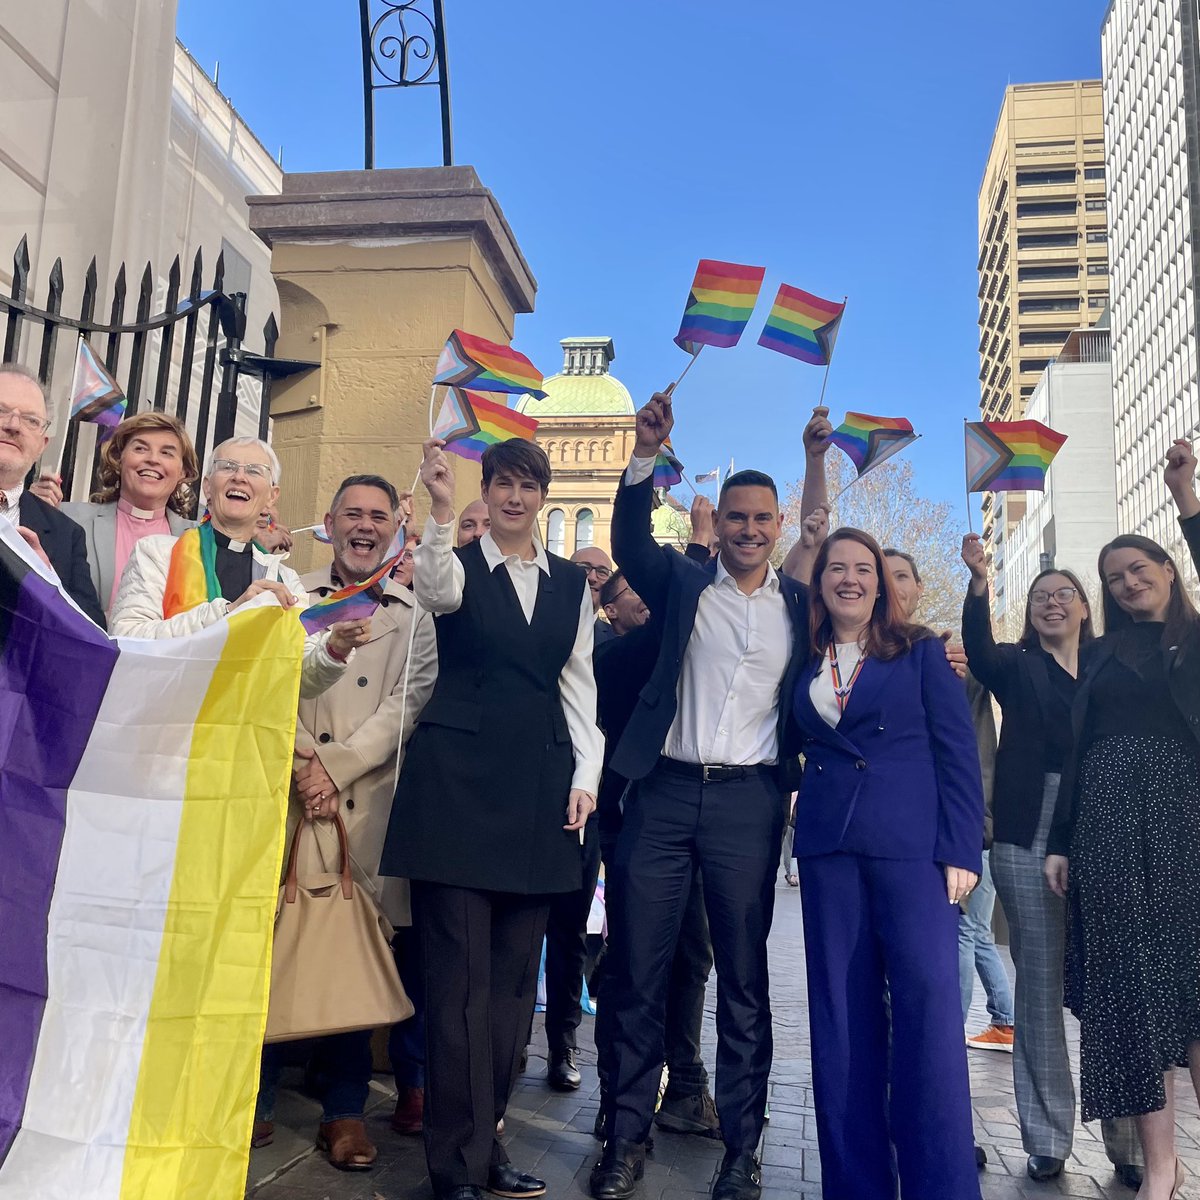 Today is a historic moment for our community with @AlexGreenwich introducing the life-changing LGBTIQA+ Equality Bills, known as the Equality Bill!